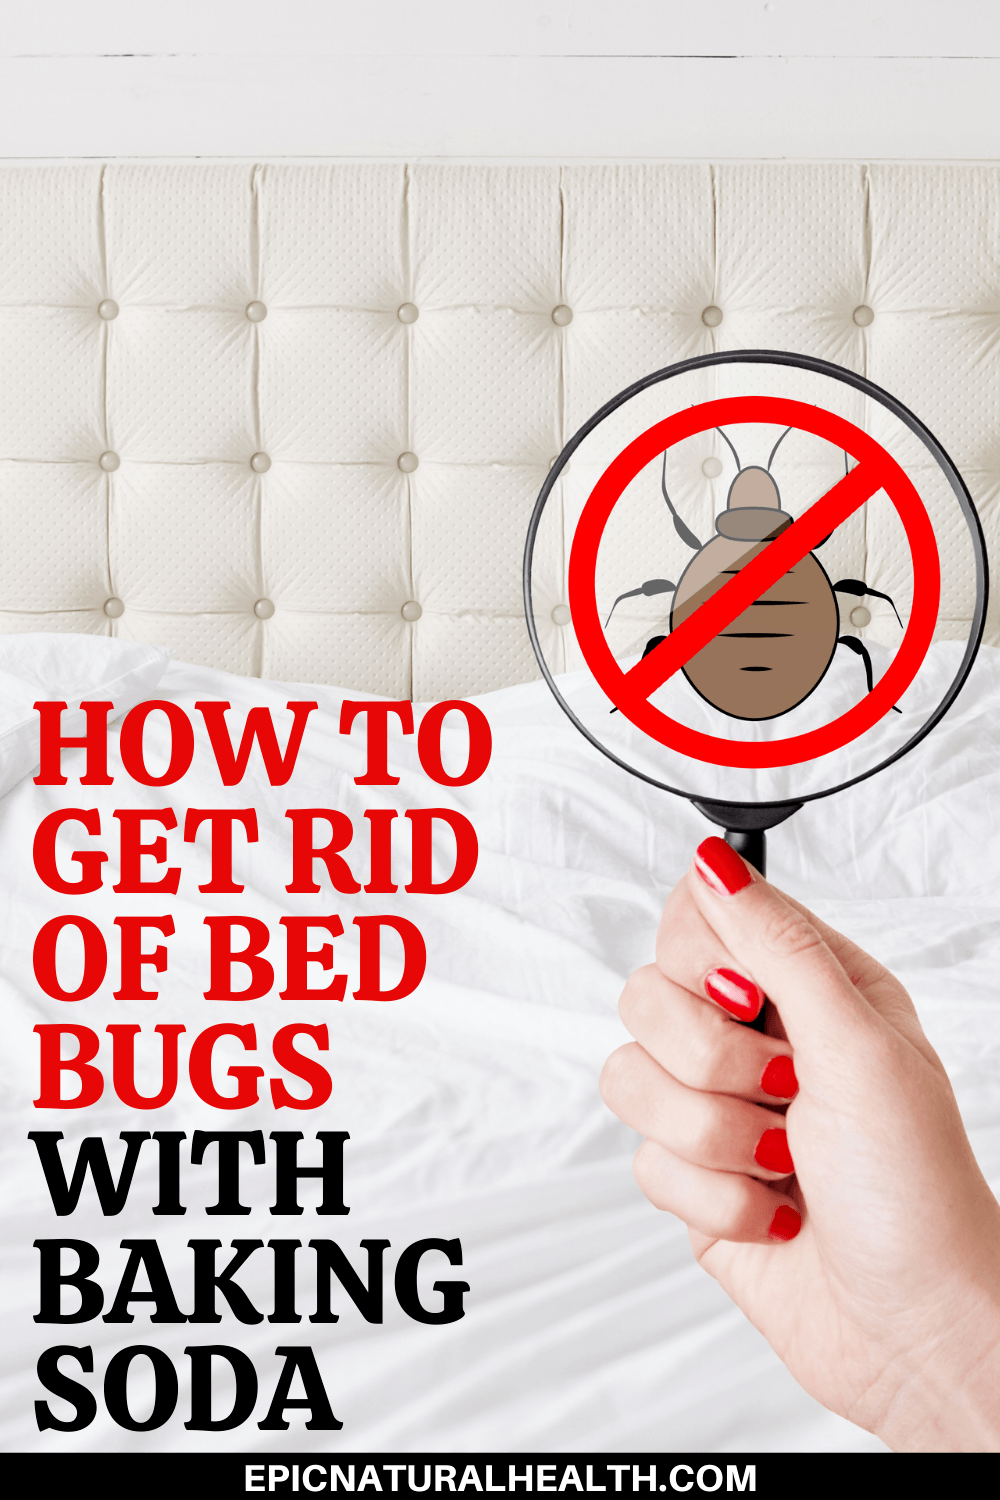 How to get rid of bed bugs with baking soda